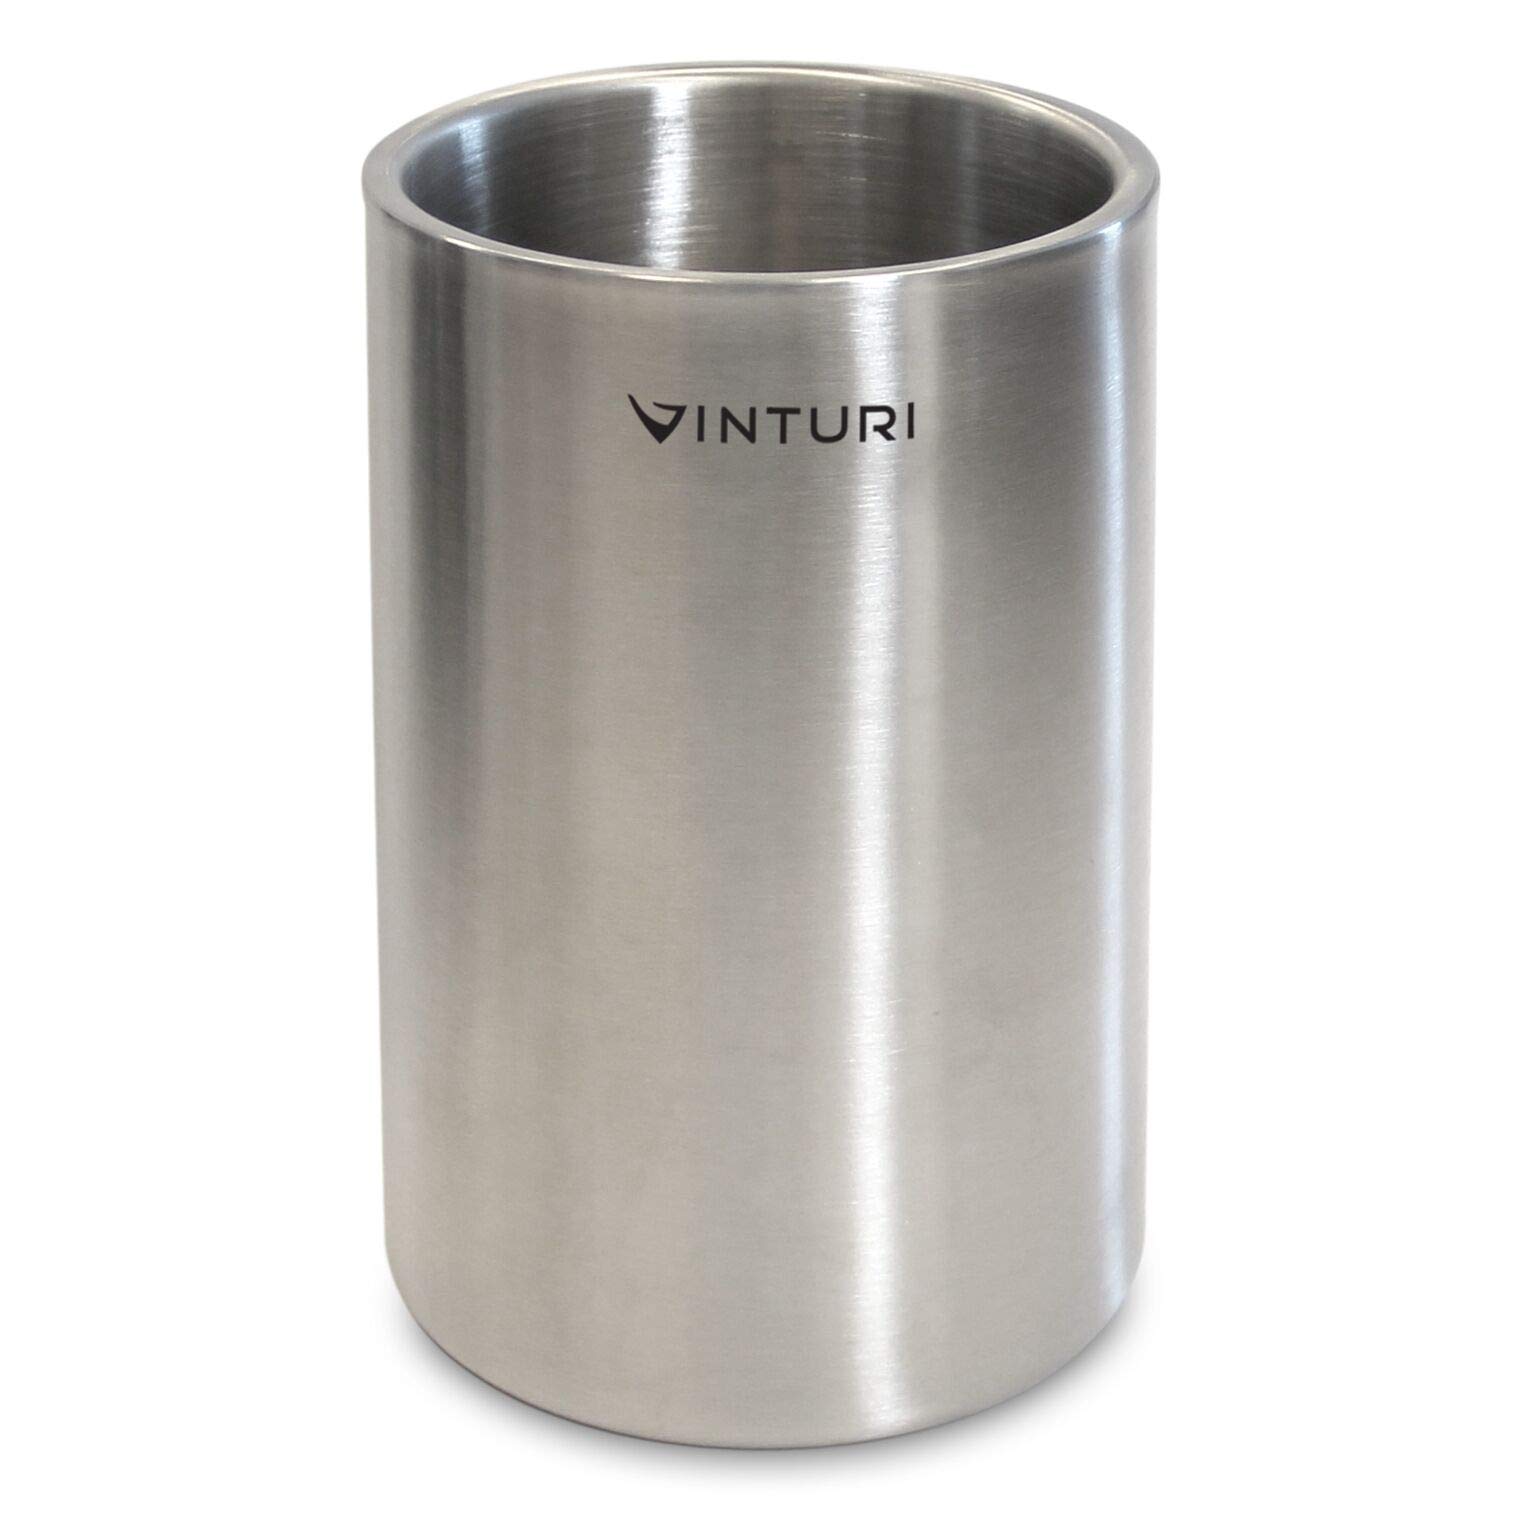 Vinturi V9073 Stainless Steel Double Walled Wine and Champagne Cooler No Ice Required, Silver